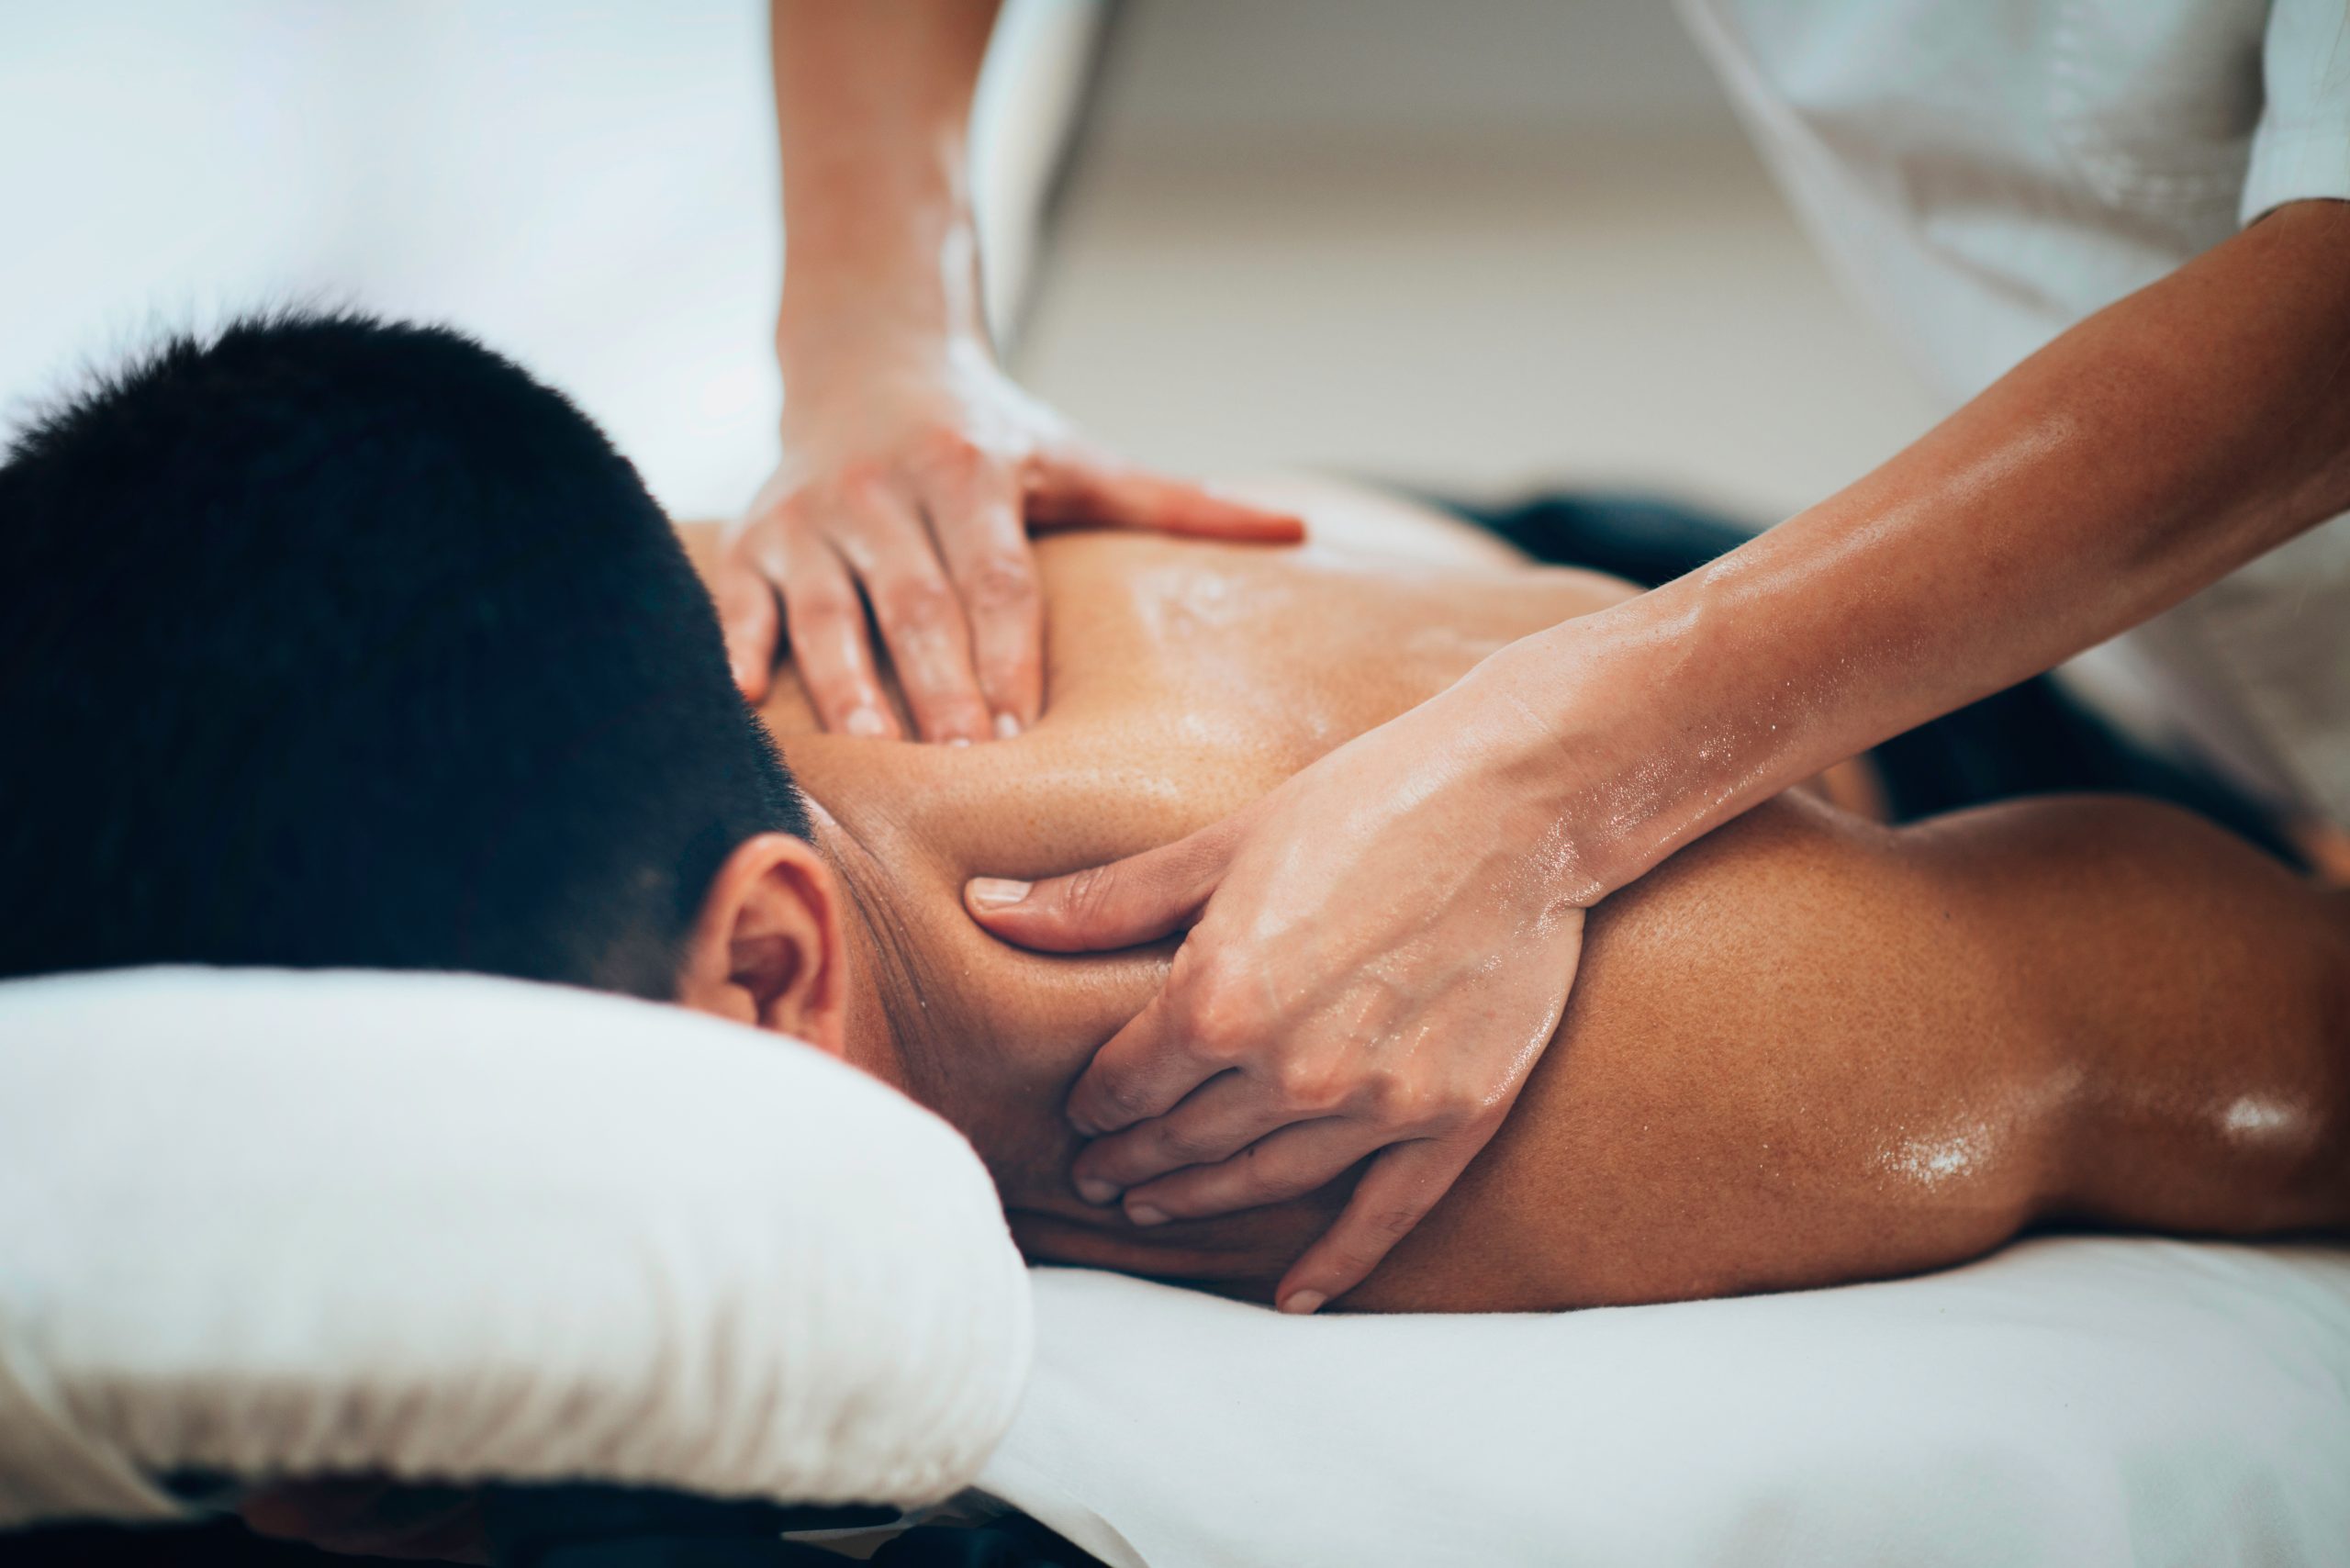 How long is a typical massage therapy session? faq - Massage Clinic